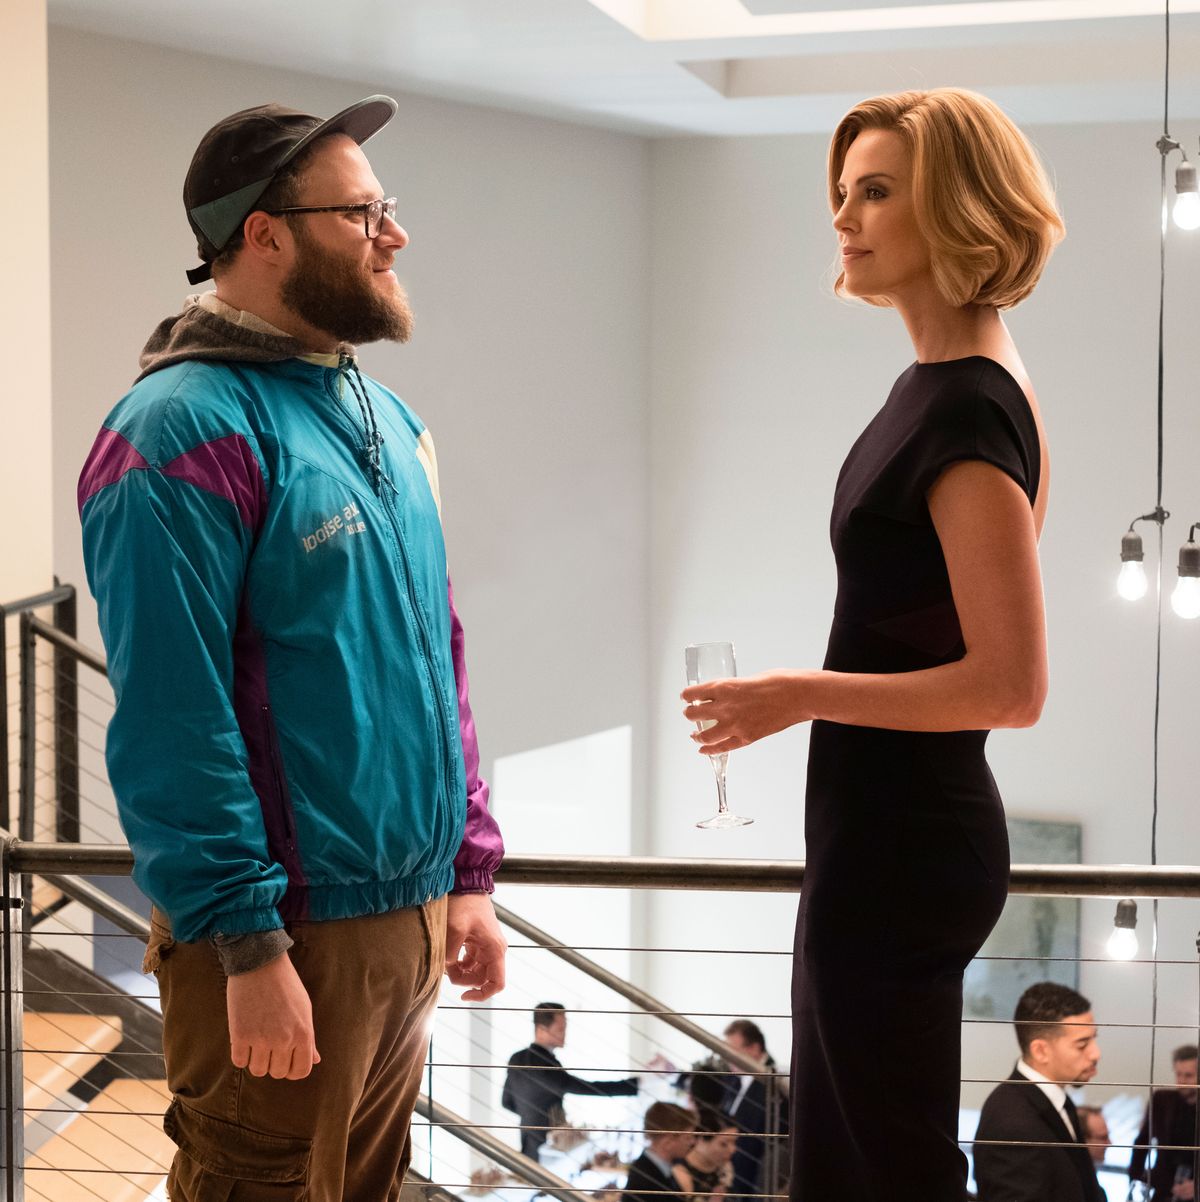 Charlize Theron - Charlize Theron and Seth Rogen Talk Long Shot Sex Scene